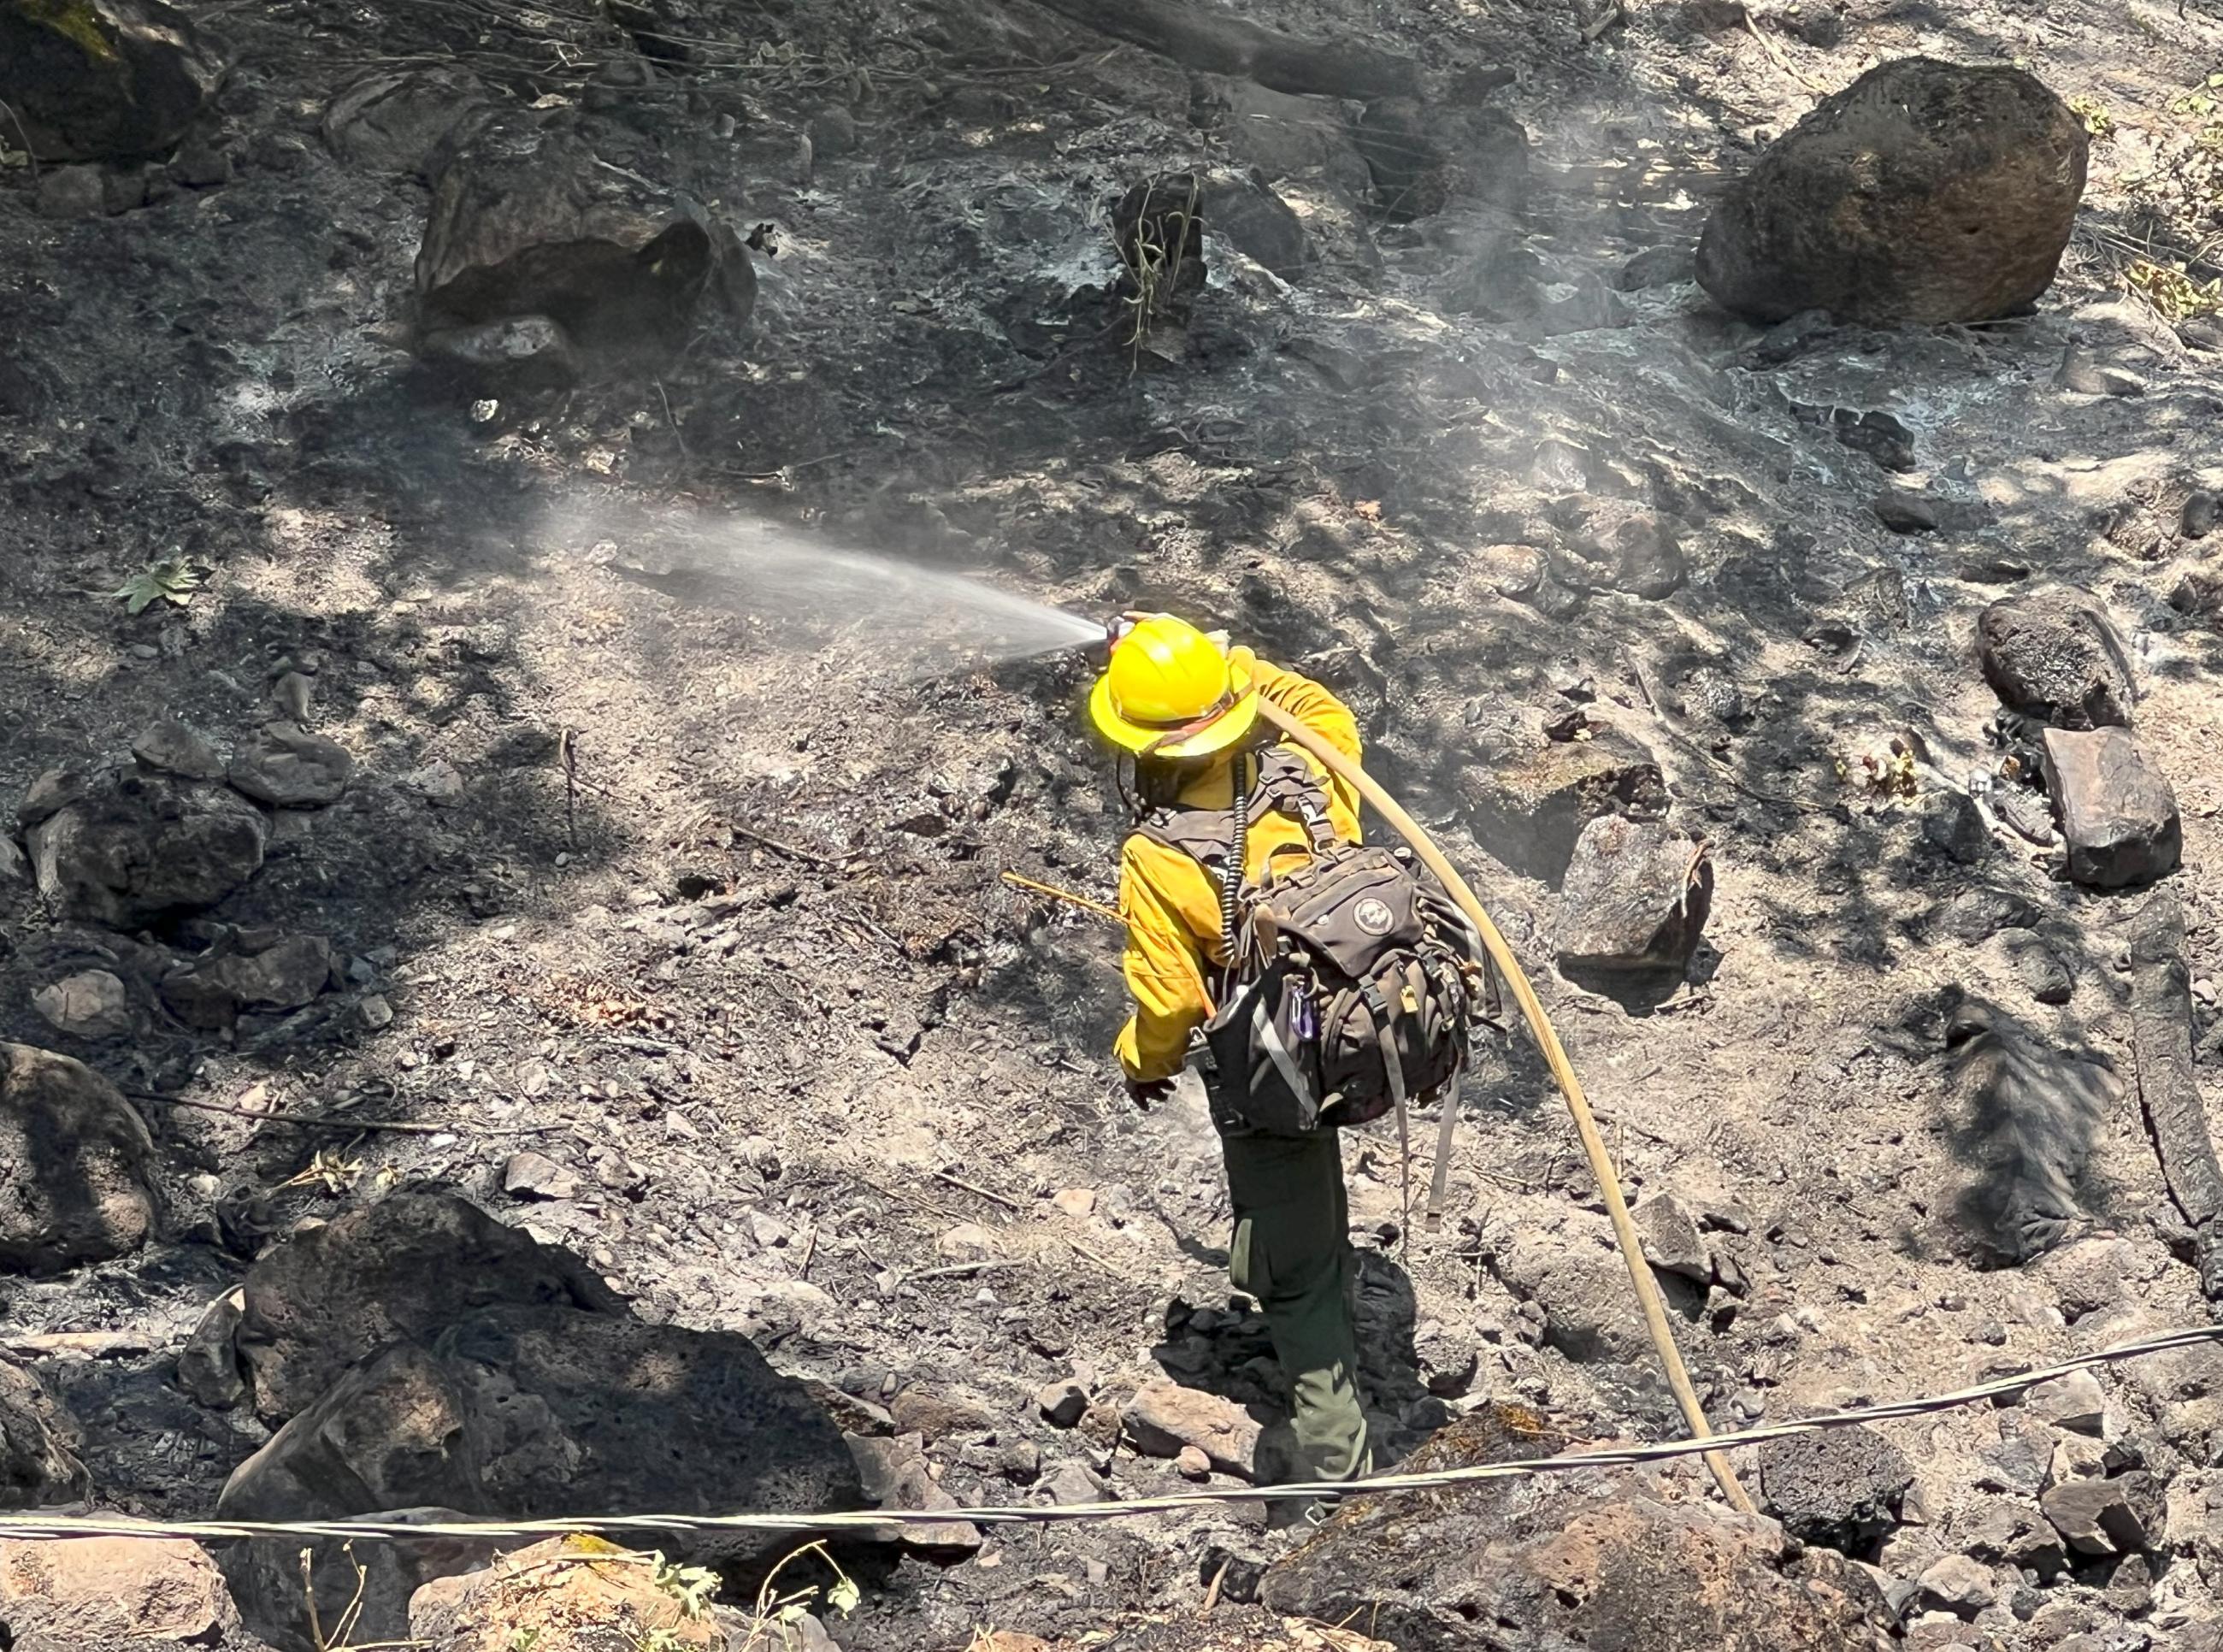 Firefighter sprays water from hose onto smoldering hillside during mop-up operations.